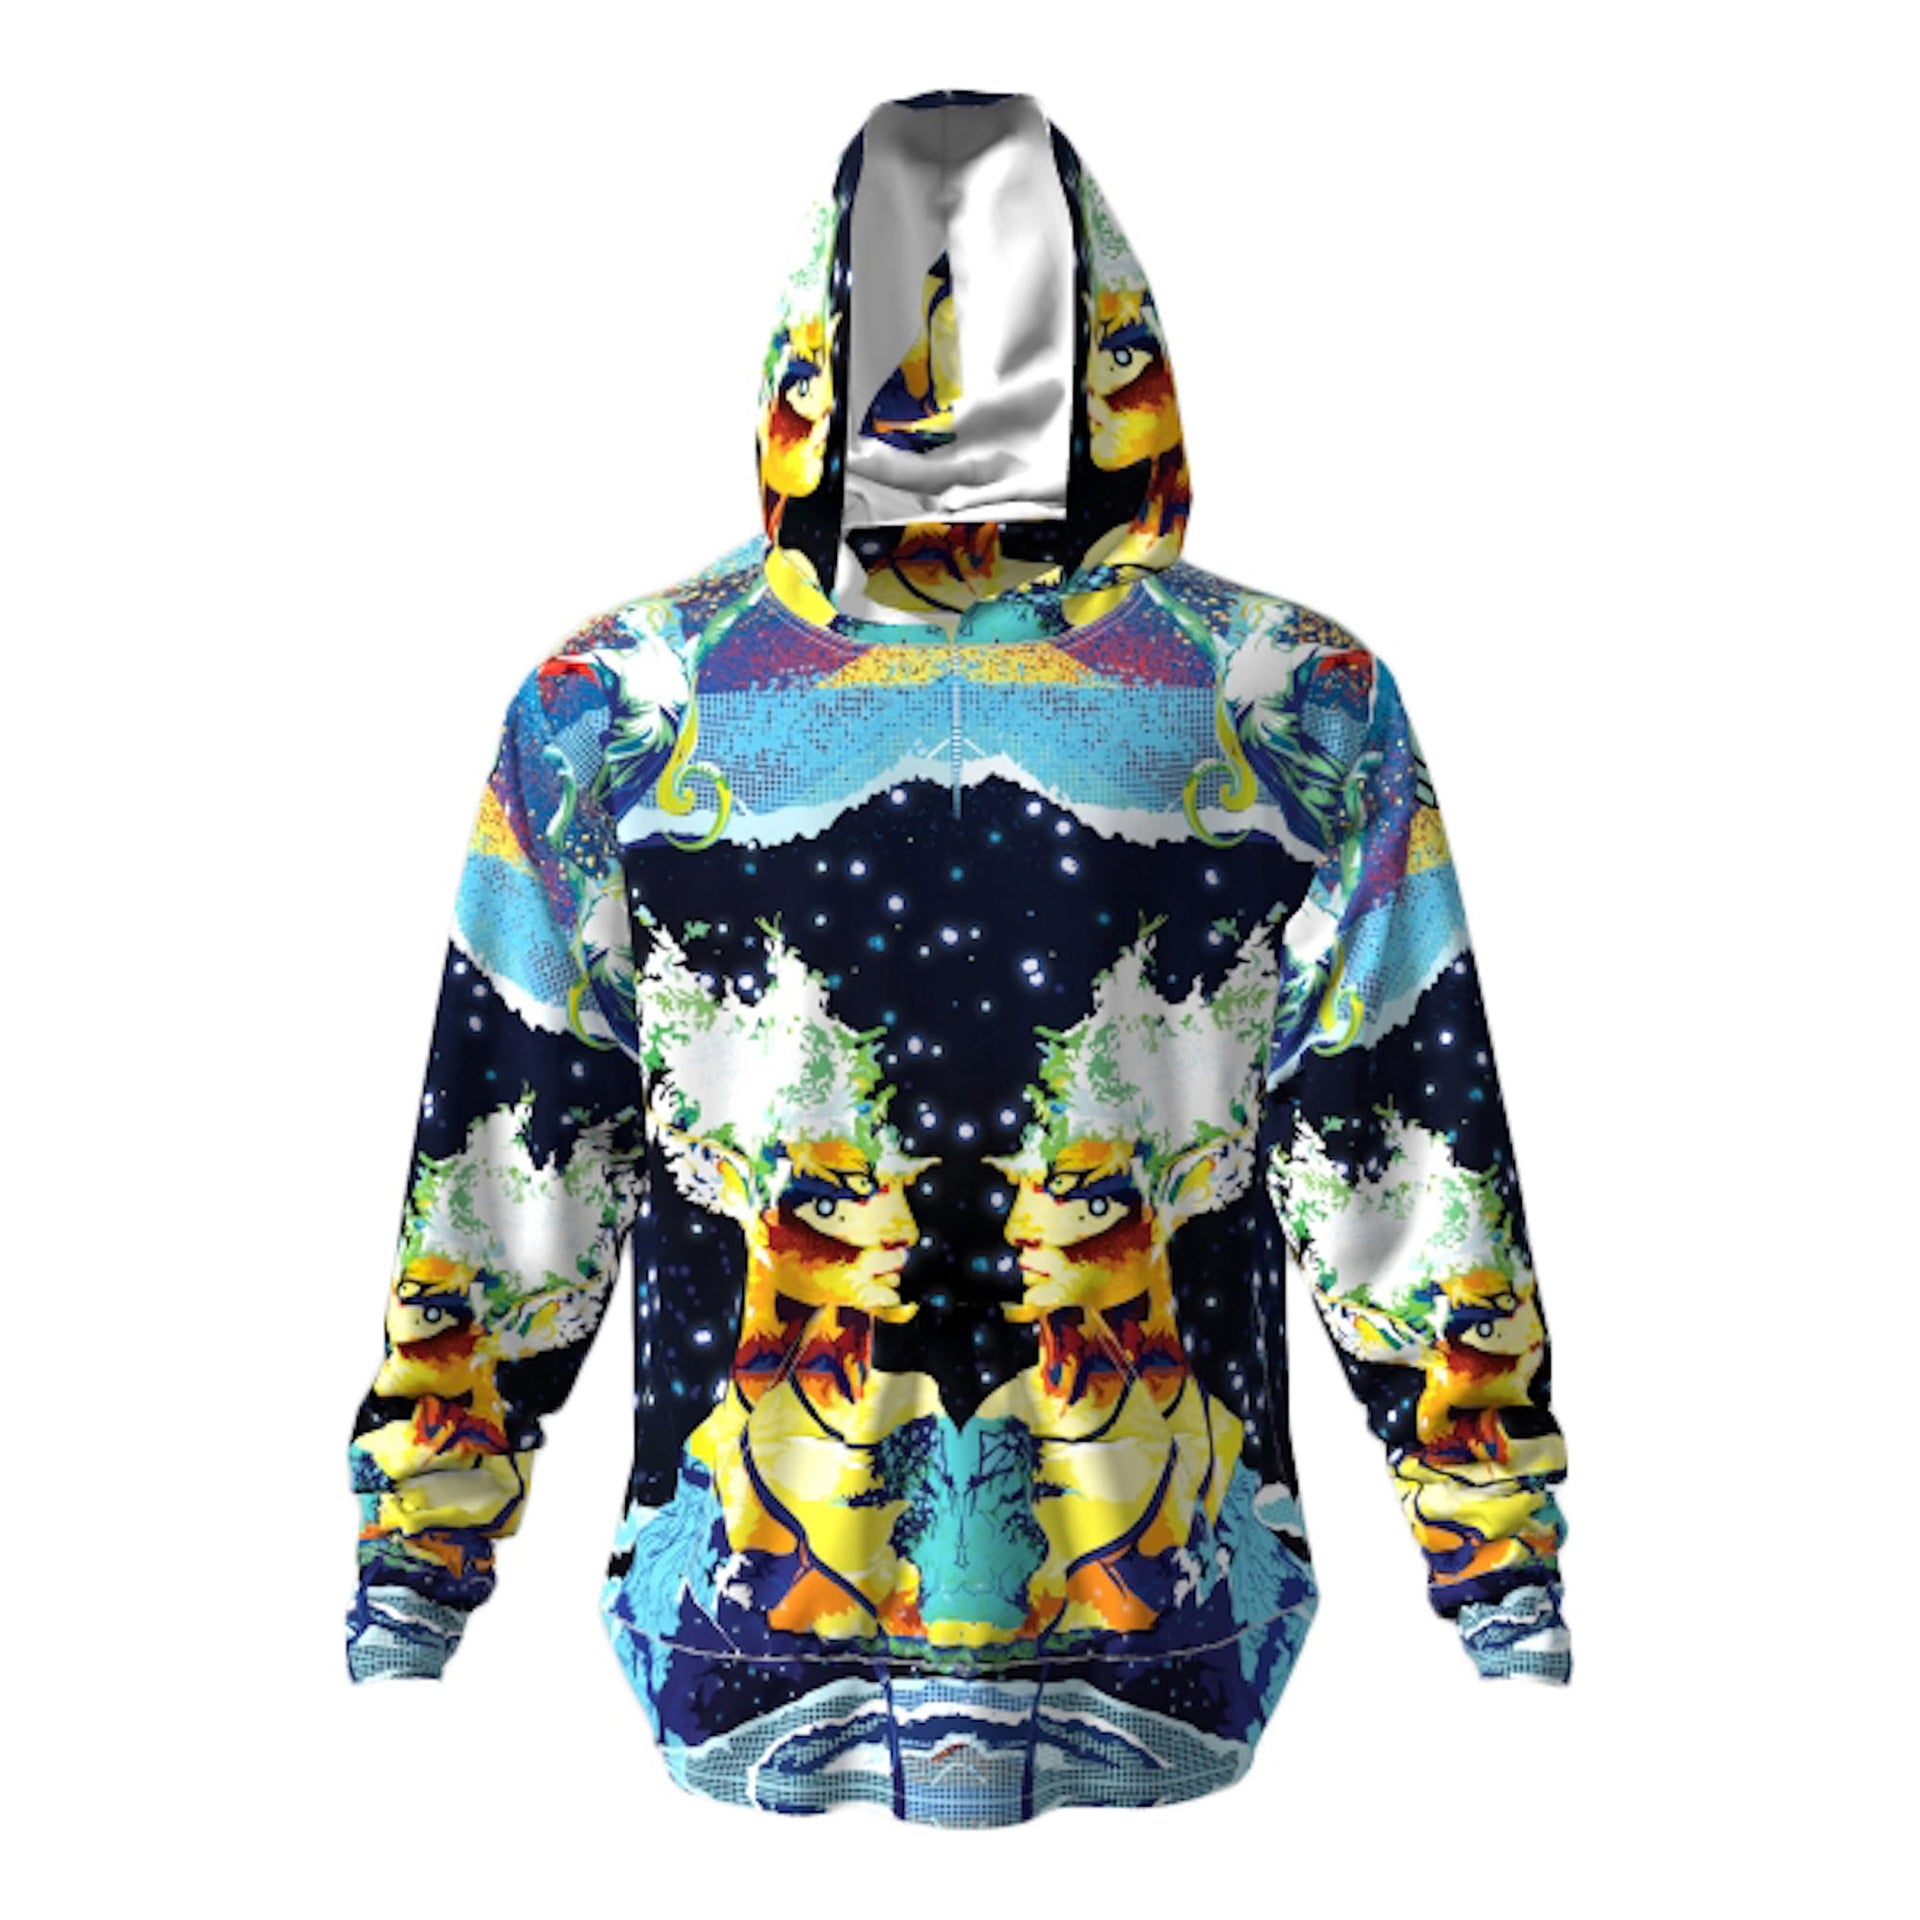 Diverse Systems of Throb Hoodie